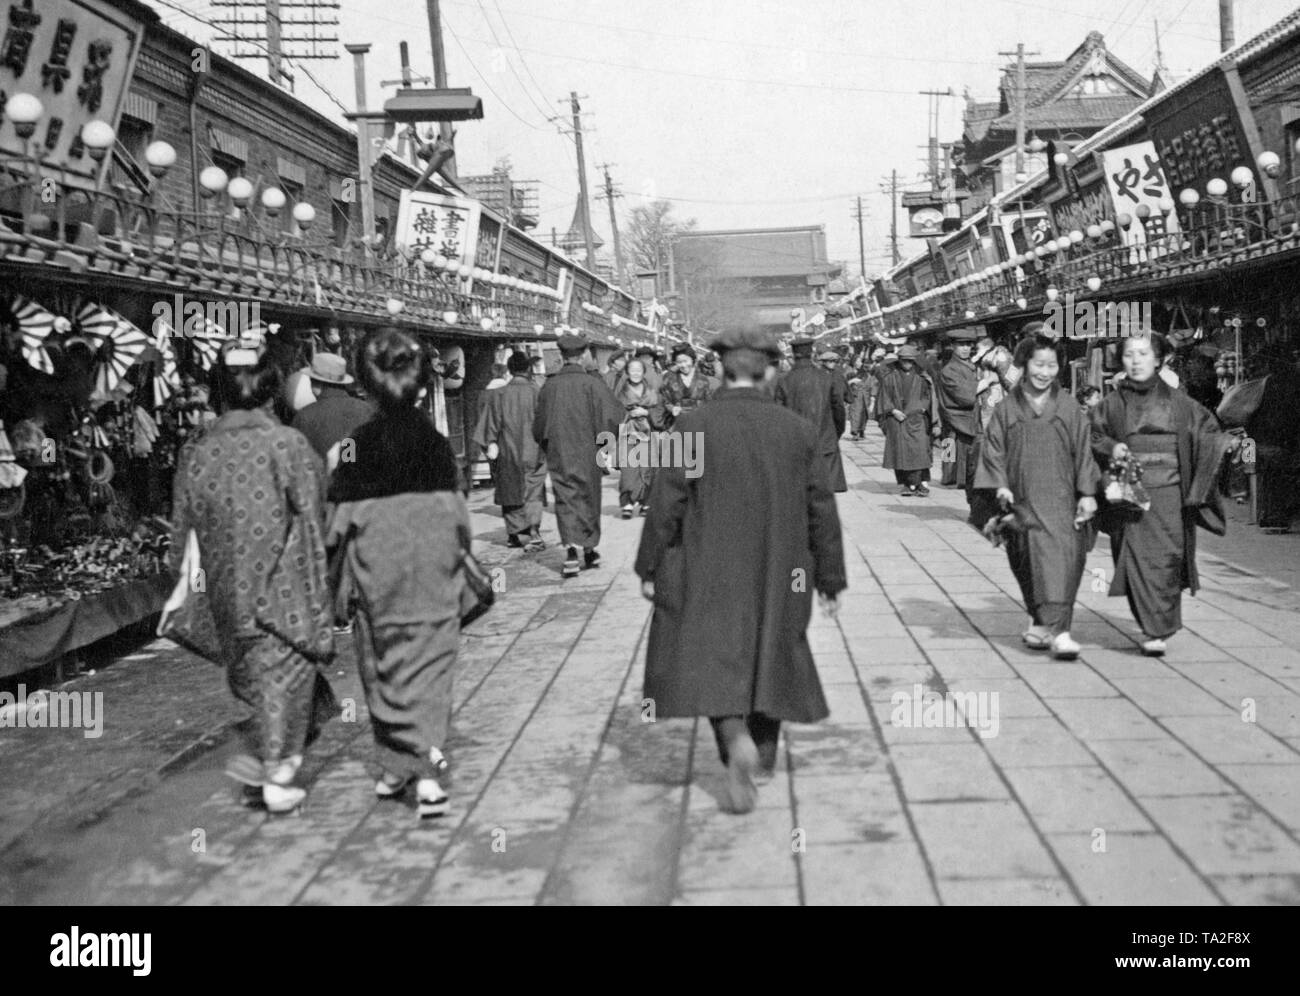 View along a street in Japan. On the left and right the street is lined with market stalls. Above it are attached lights and signs. (undated image, ca. 1930s) Stock Photo